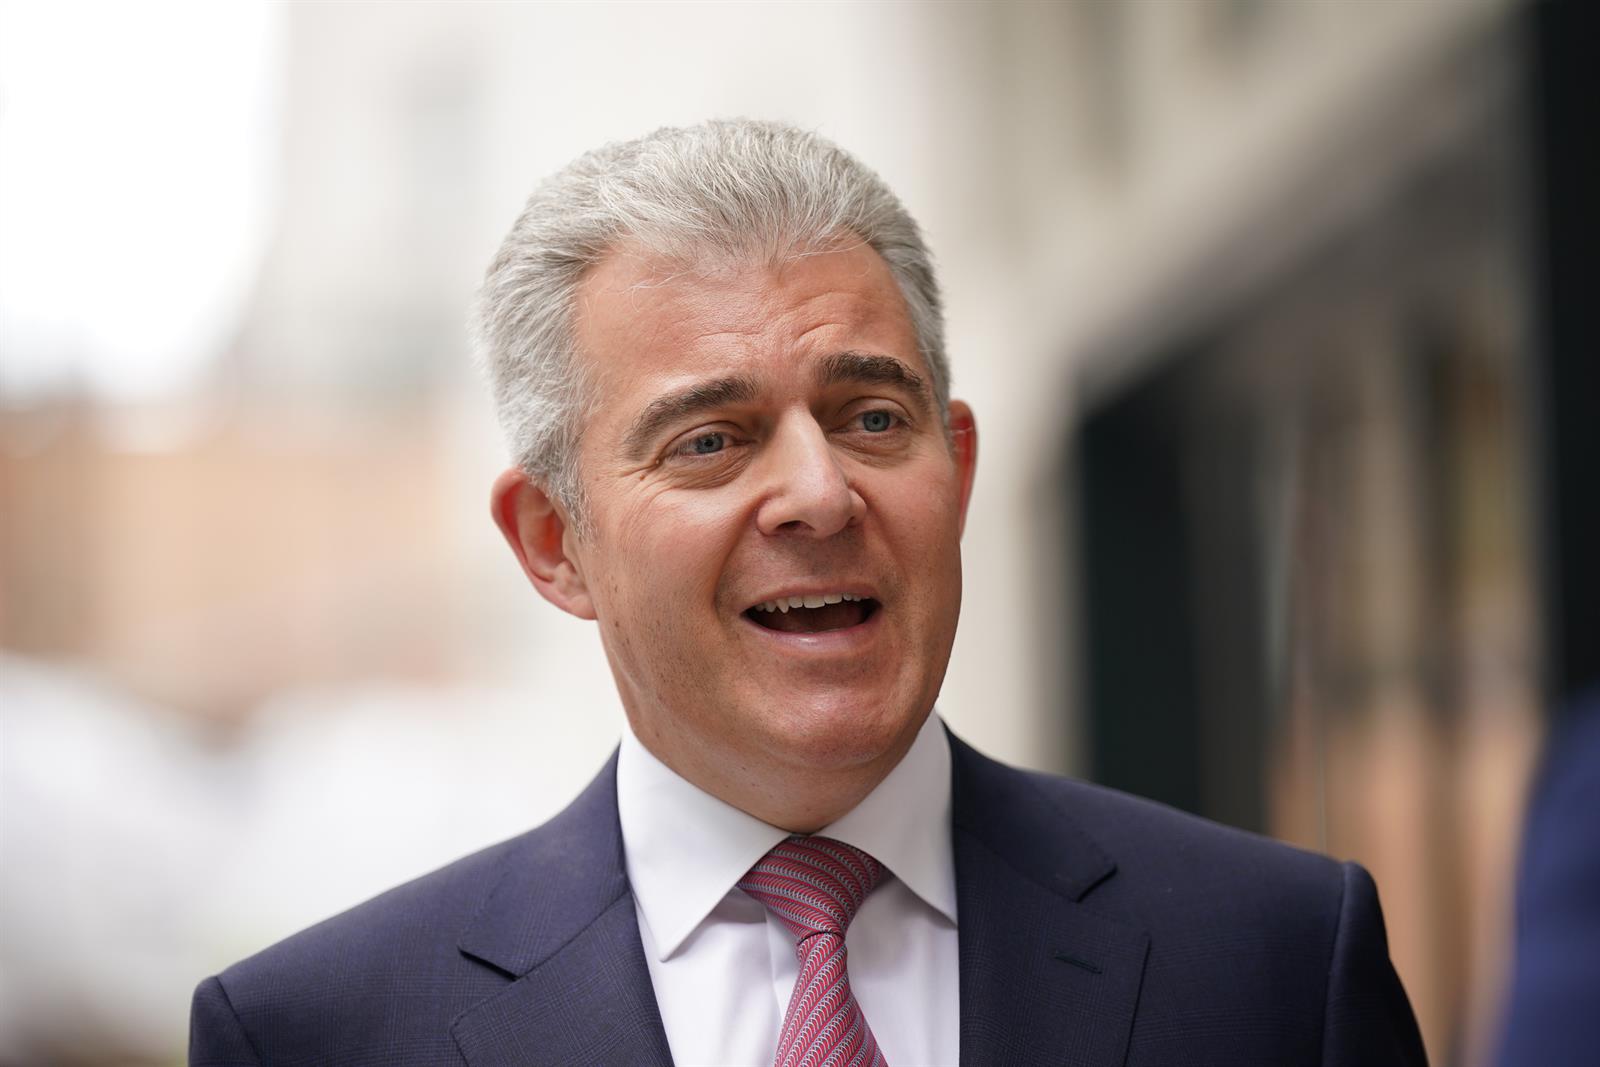 LetterOne named Brandon Lewis as leader of its presidential advisory board